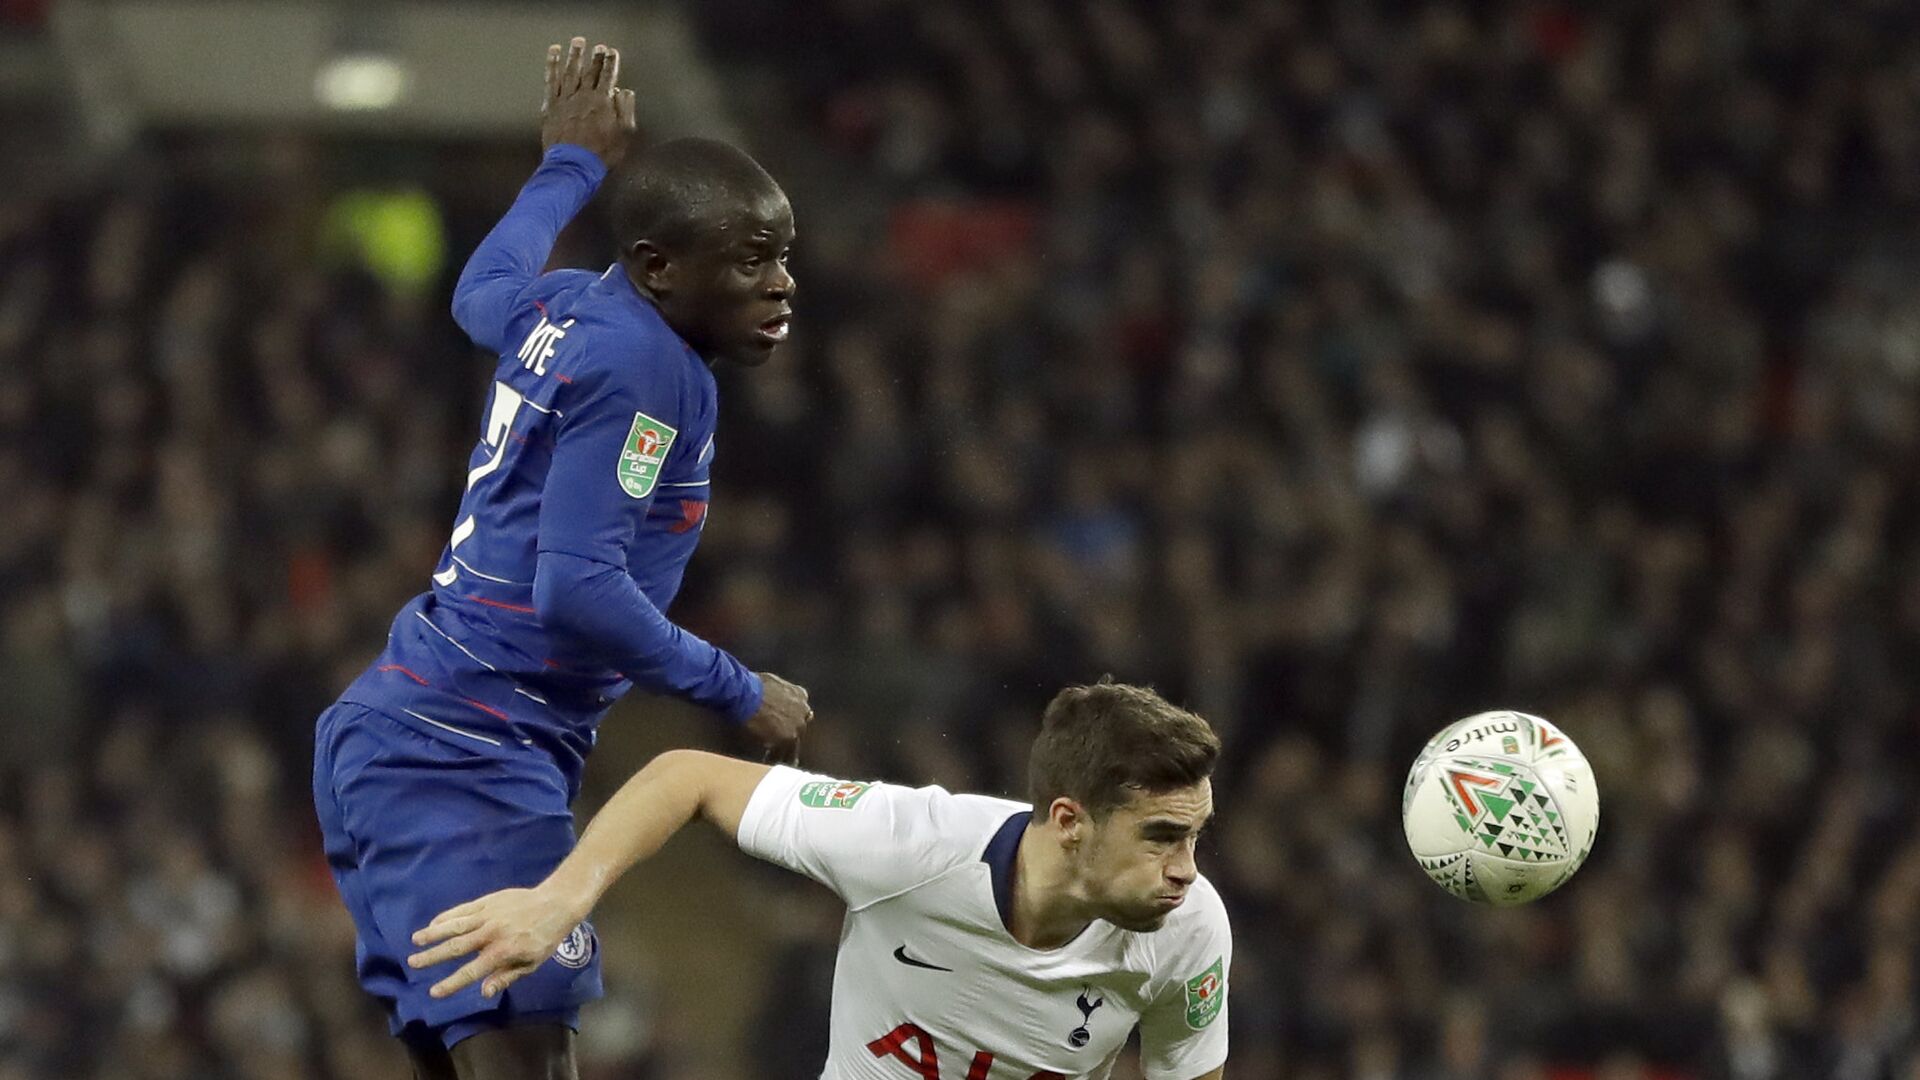 Tottenham's Harry Winks, right, and Chelsea's N'Golo Kante jump for the ball during the English League Cup semifinal first leg soccer match between Tottenham Hotspur and Chelsea at Wembley Stadium in London, Tuesday, Jan. 8, 2019 - اسپوتنیک افغانستان  , 1920, 11.02.2022